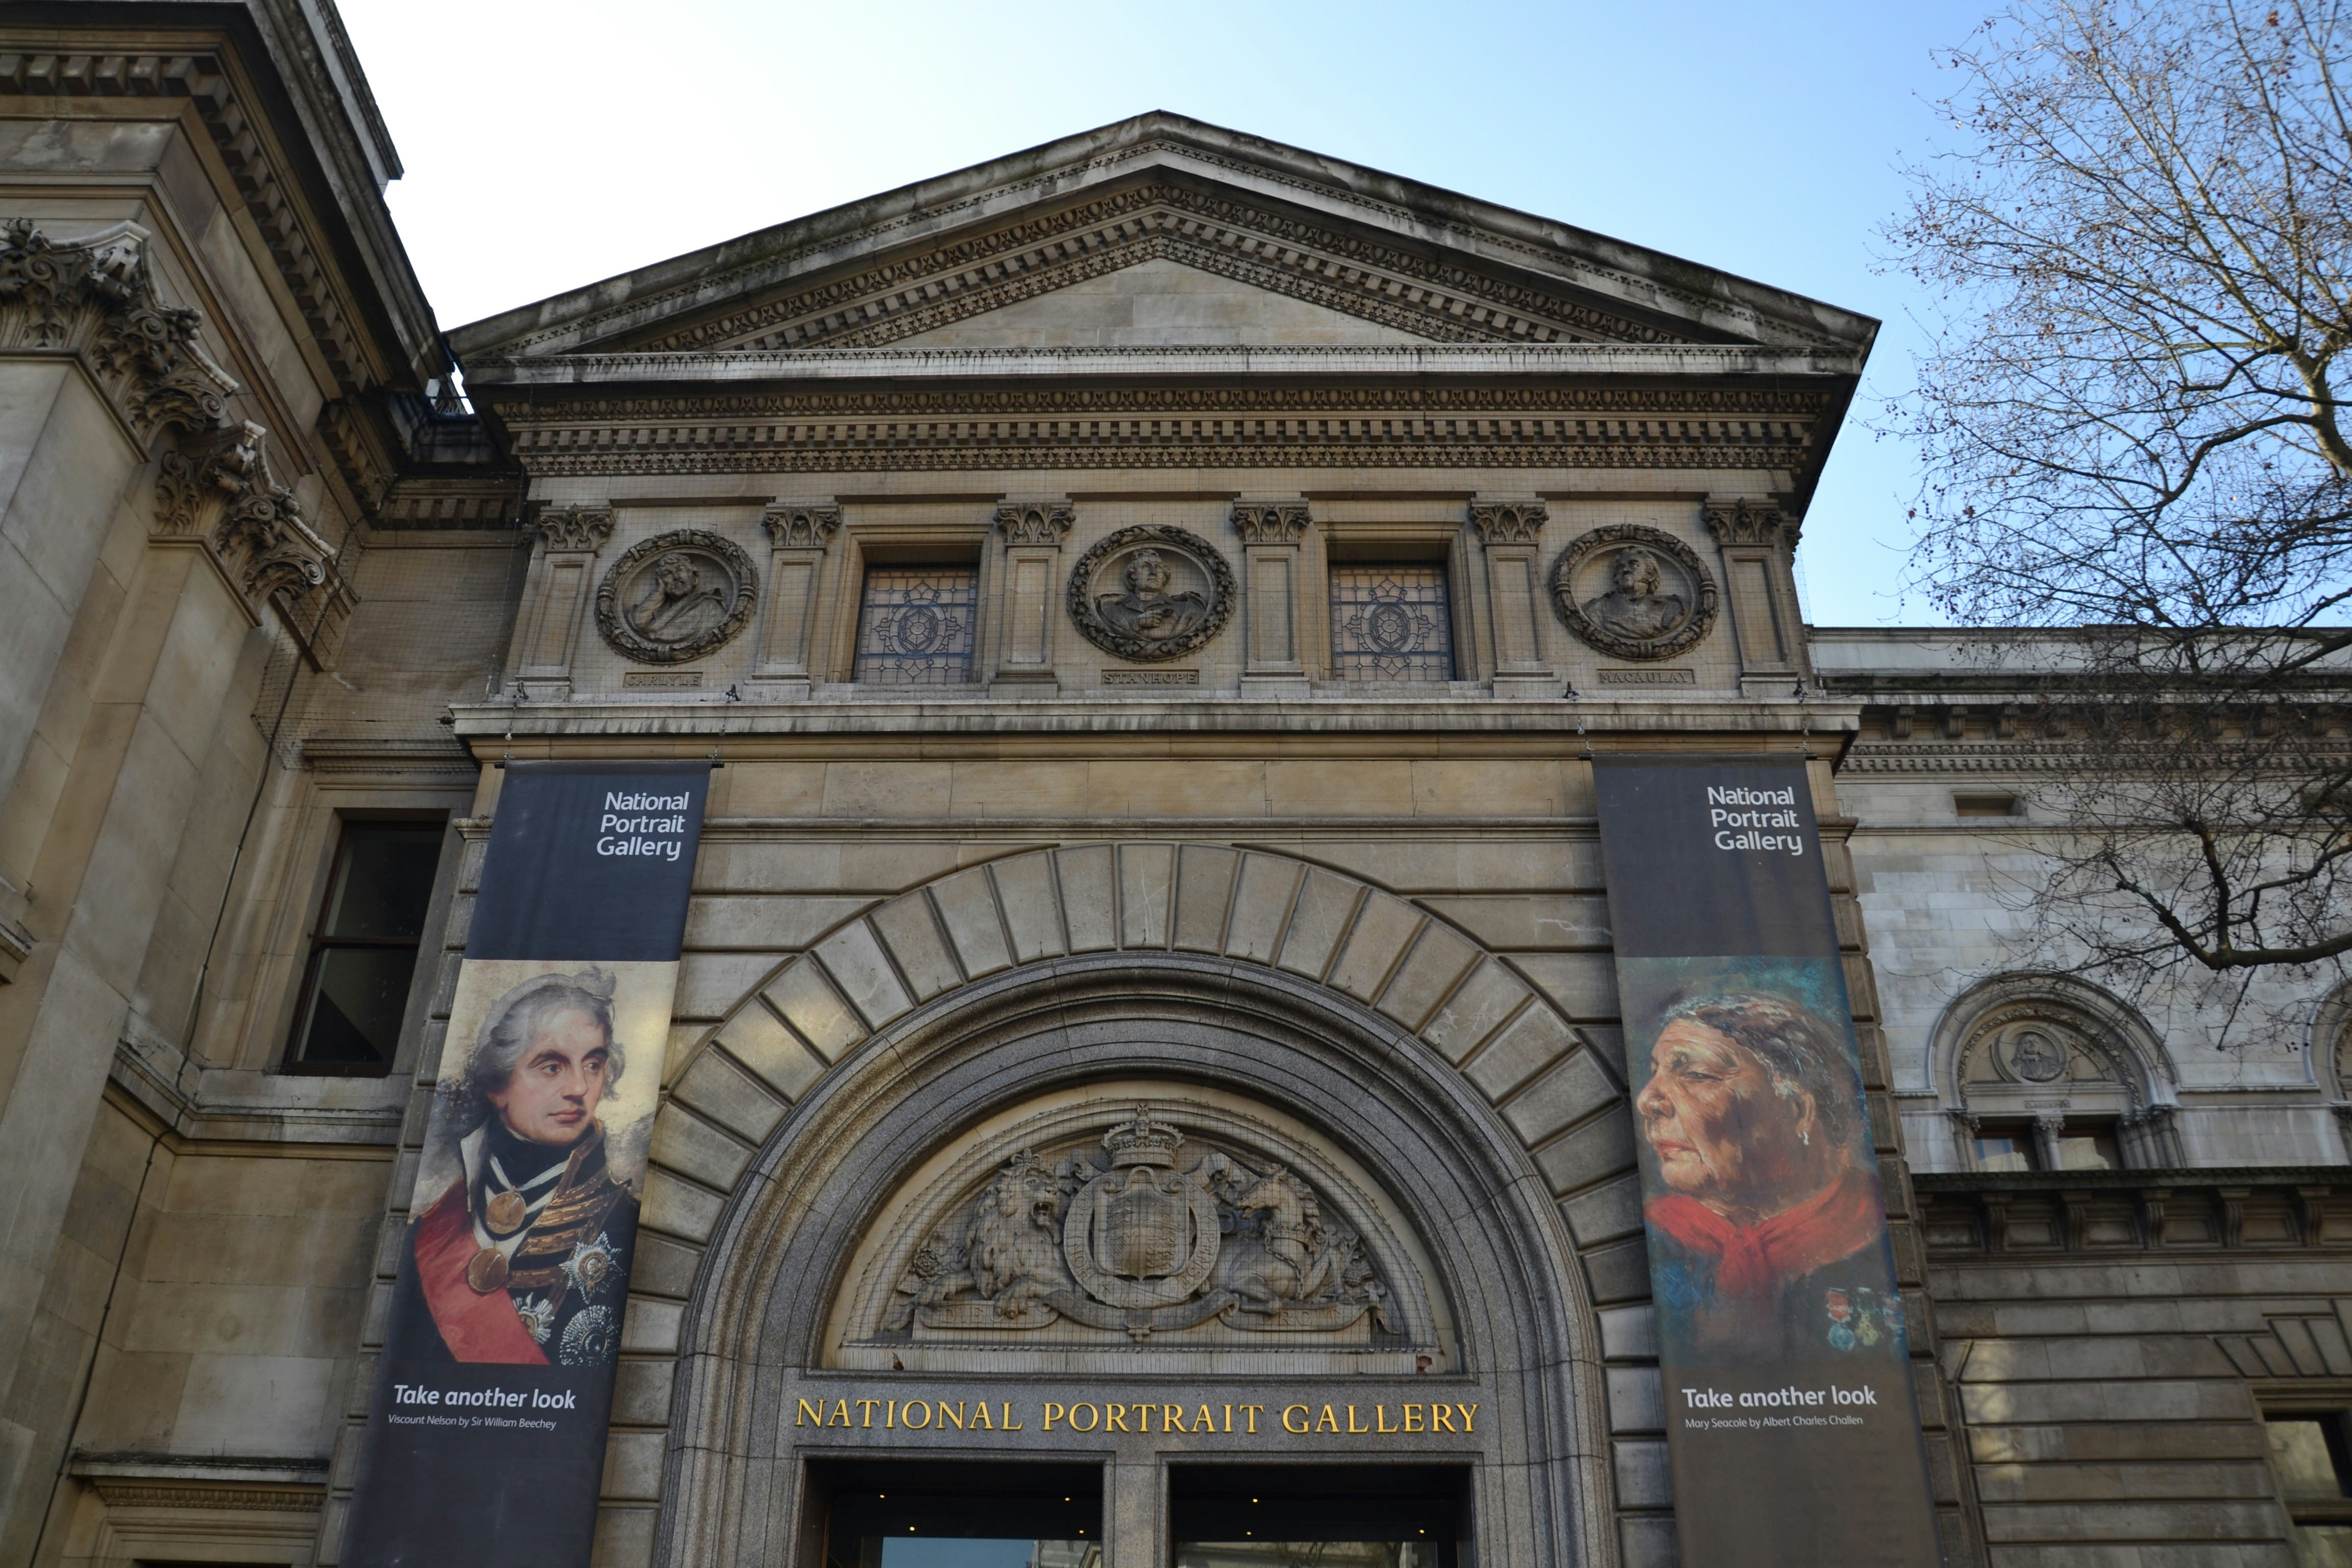 The entrace to the national portrait gallery. 